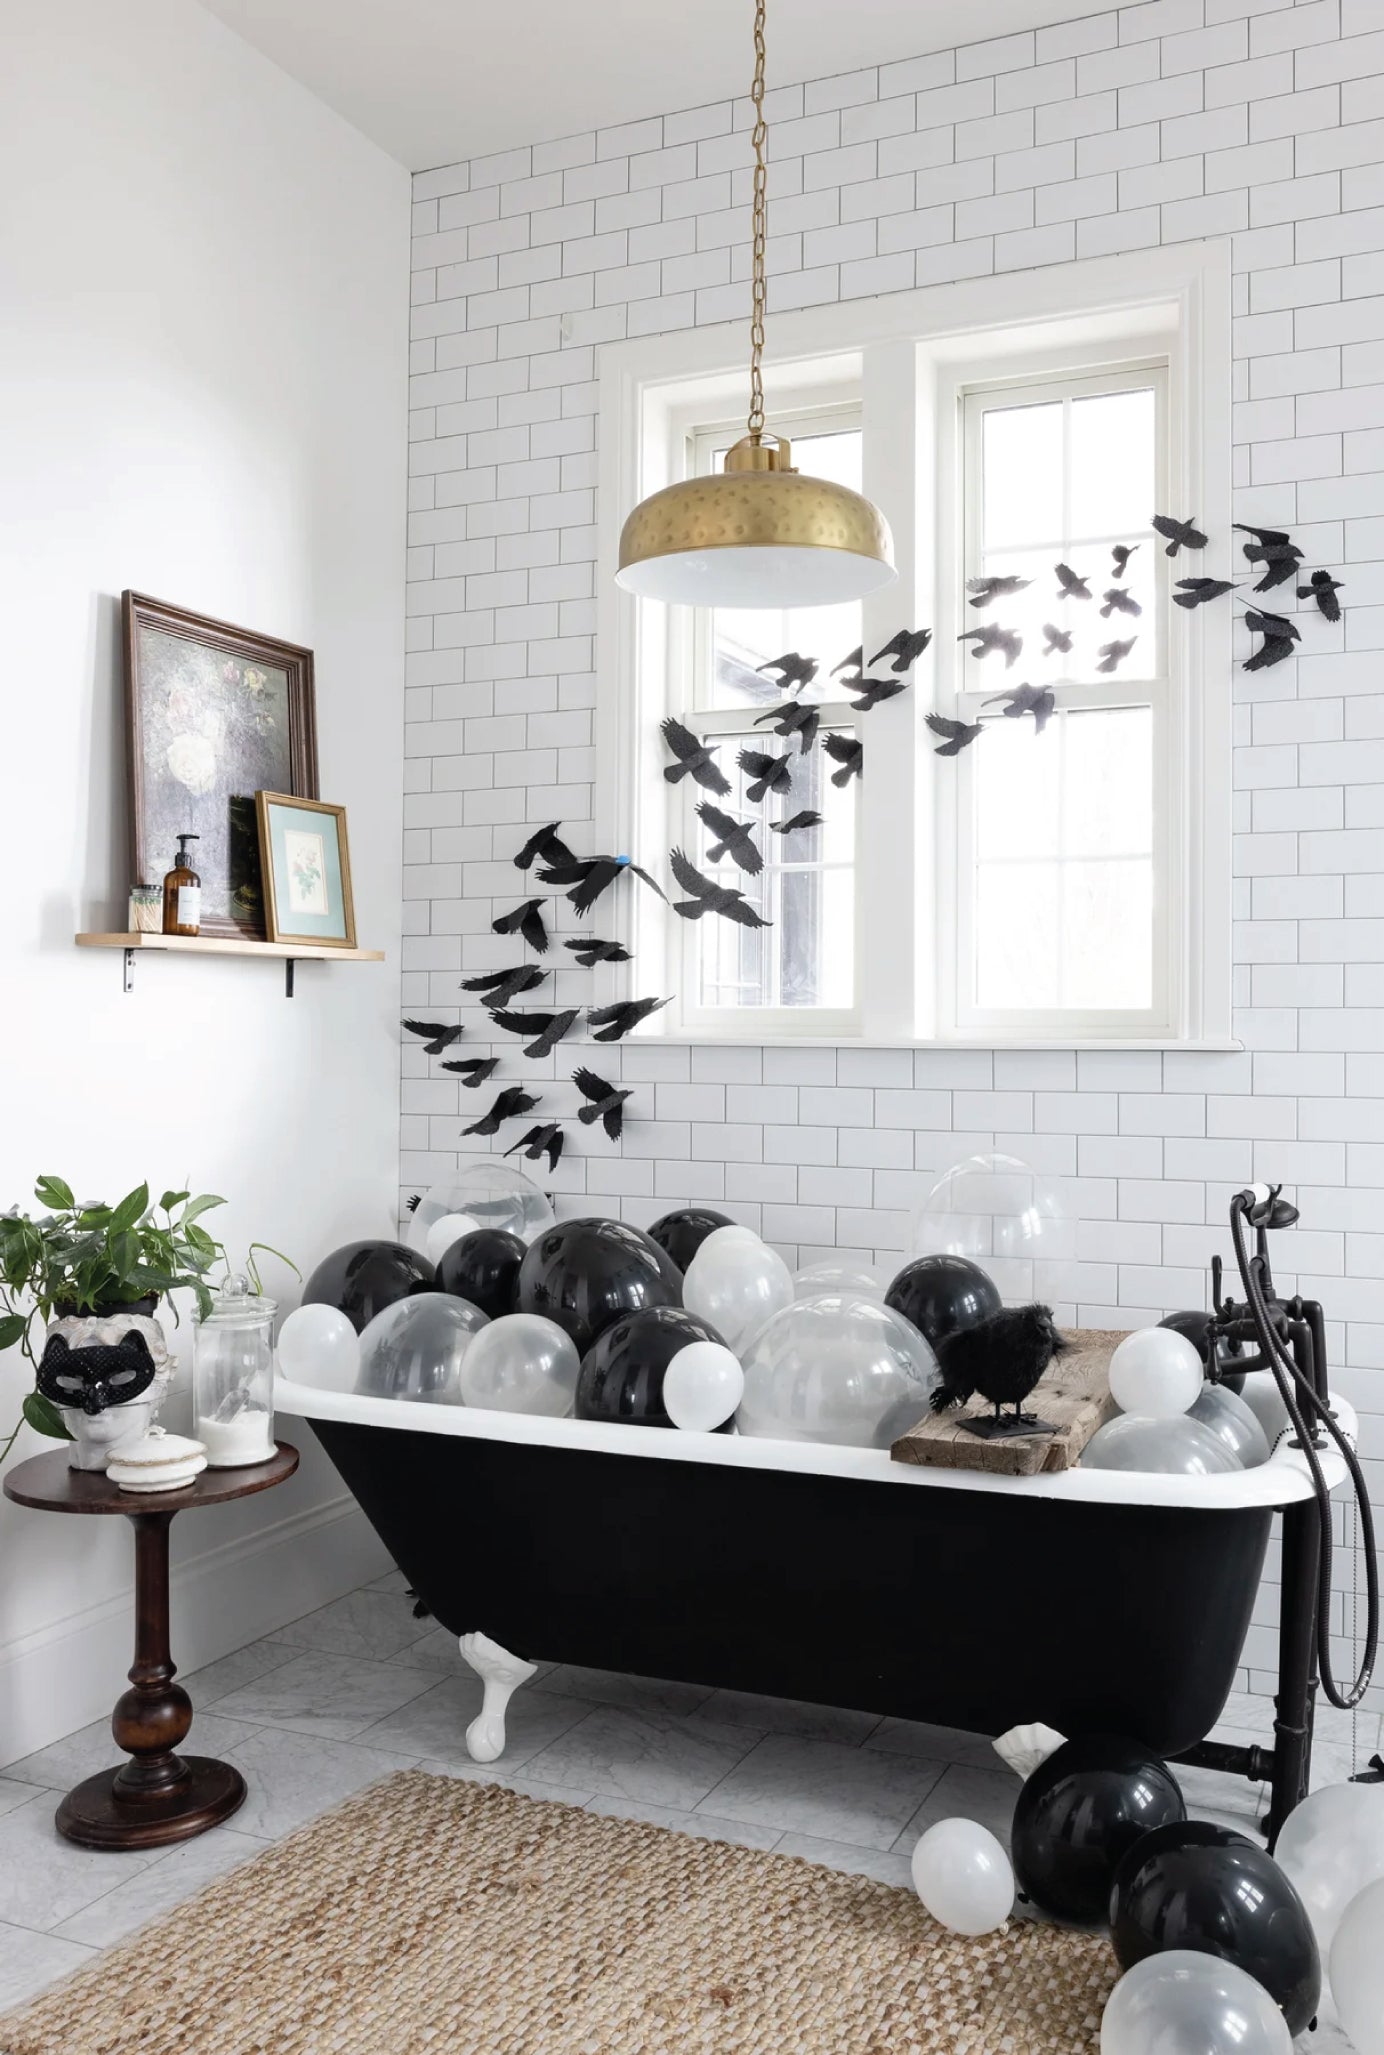 Black Glitter Ravens Halloween Wall Decorations | The Party Darling